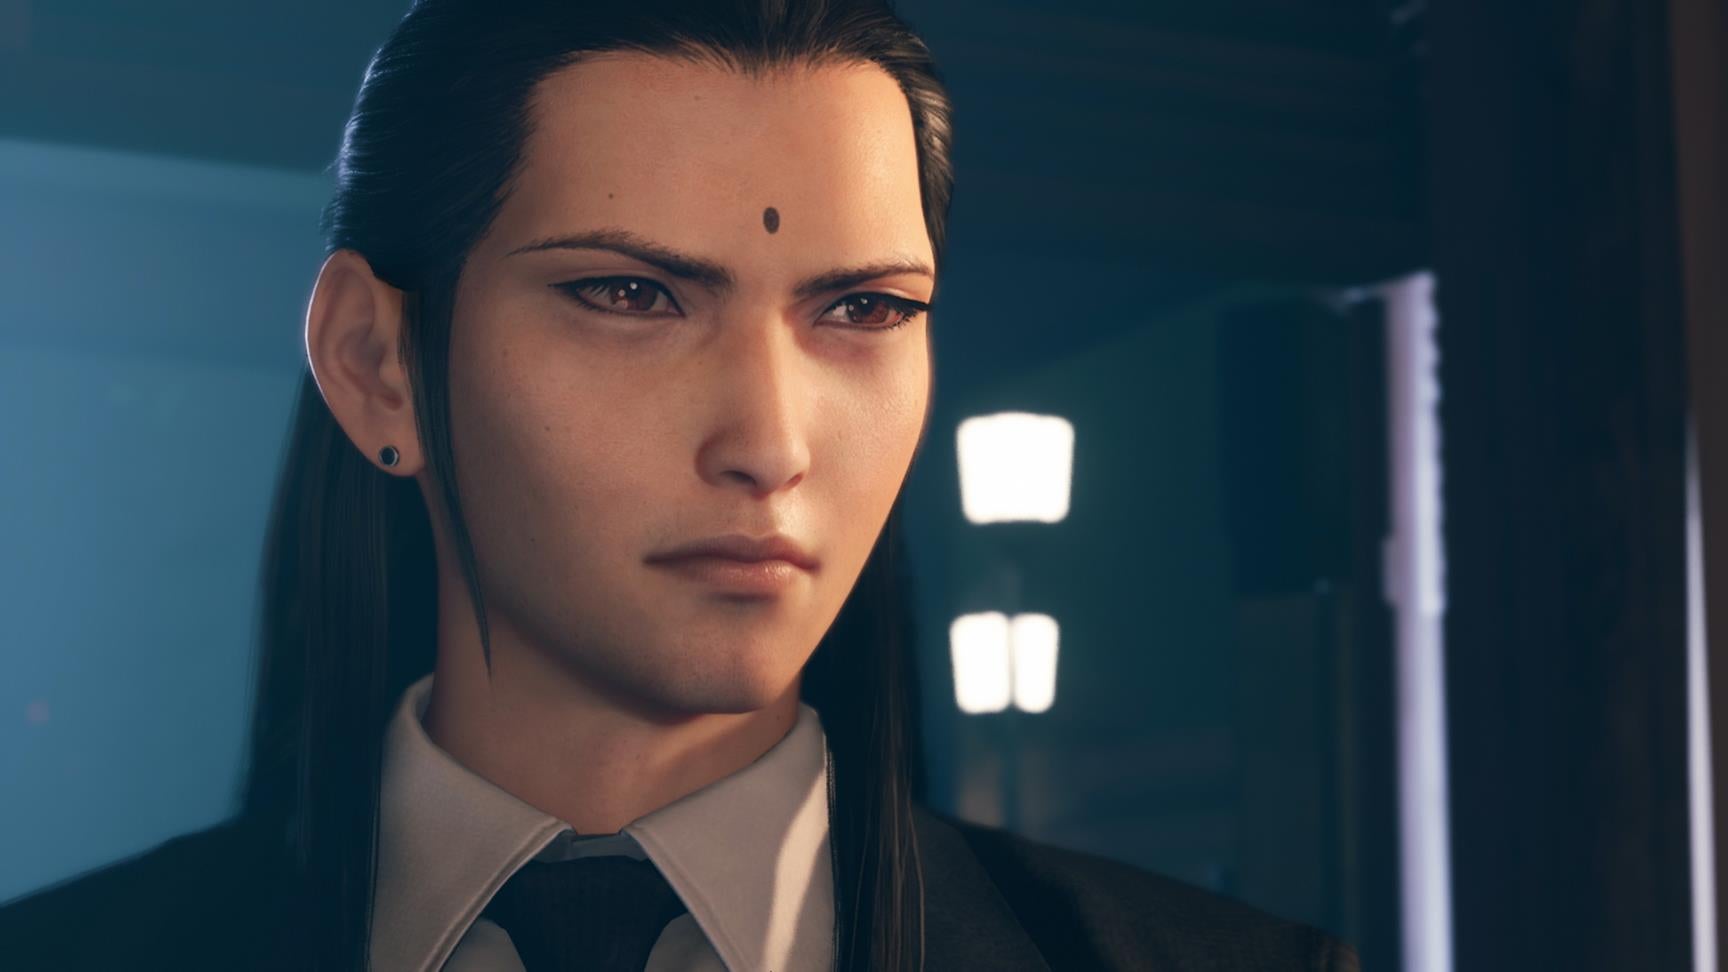 Image for Final Fantasy 7 Remake Tseng's actor is “delighted” for the character, who’s been voted as having the horniest fans